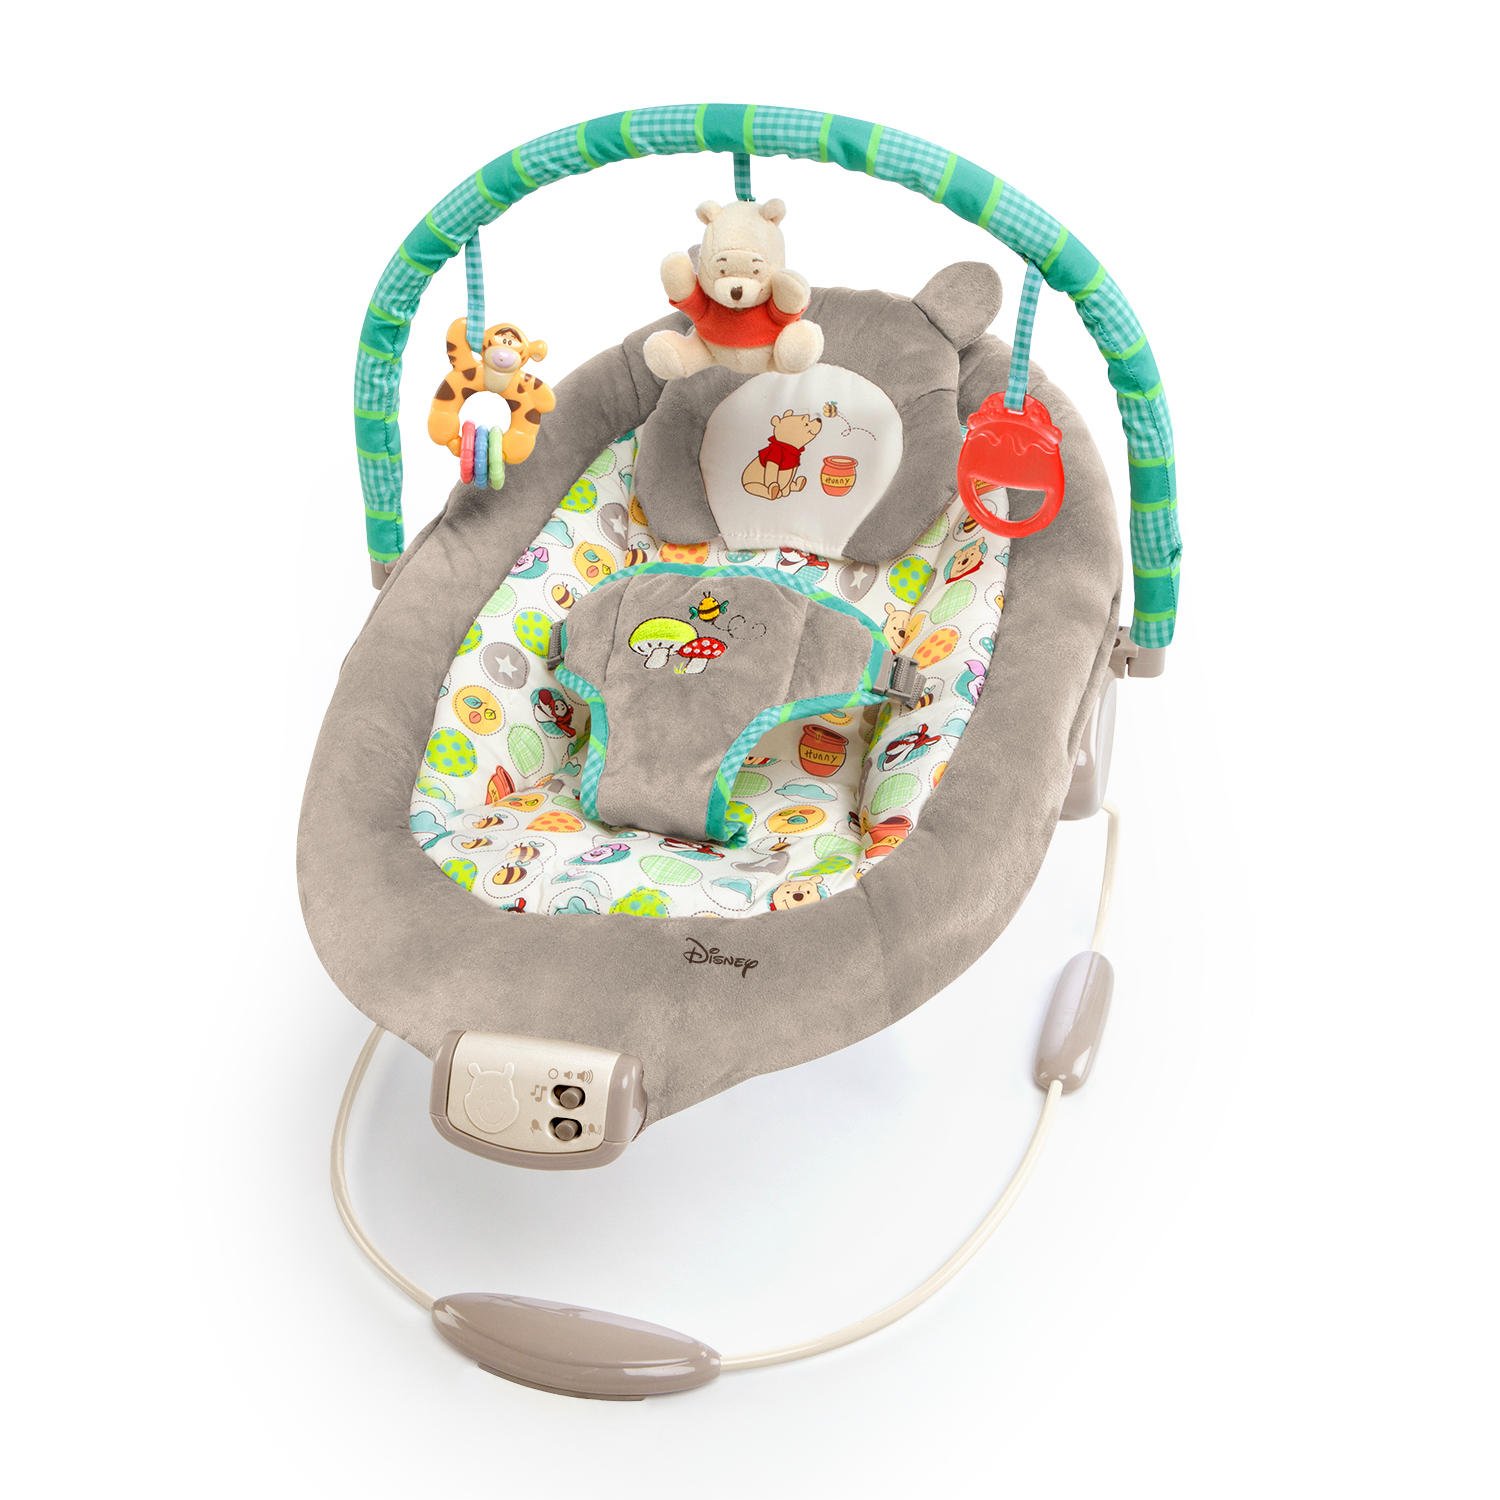 Disney Baby, Winnie the Pooh Vibrating Rocker with Auto Off, Melodies, Volume Control, Removable Headrest and Play Arch